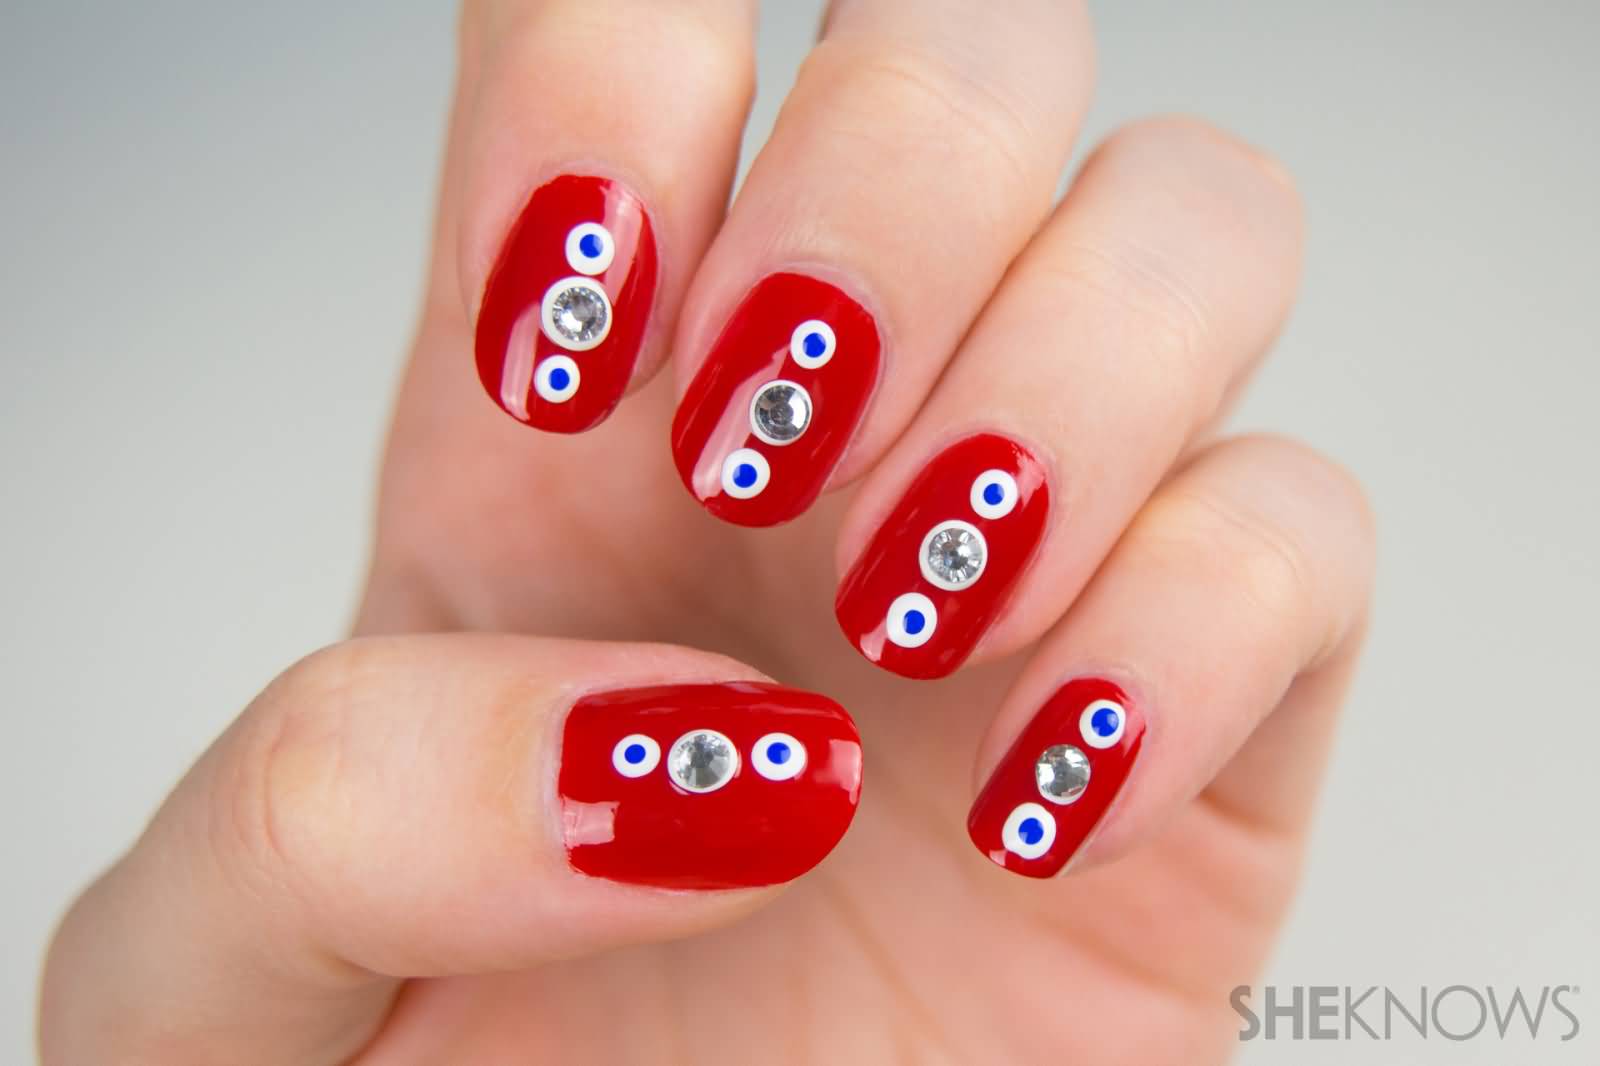 Red Nails With White And Blue Polka Dots Nail Art